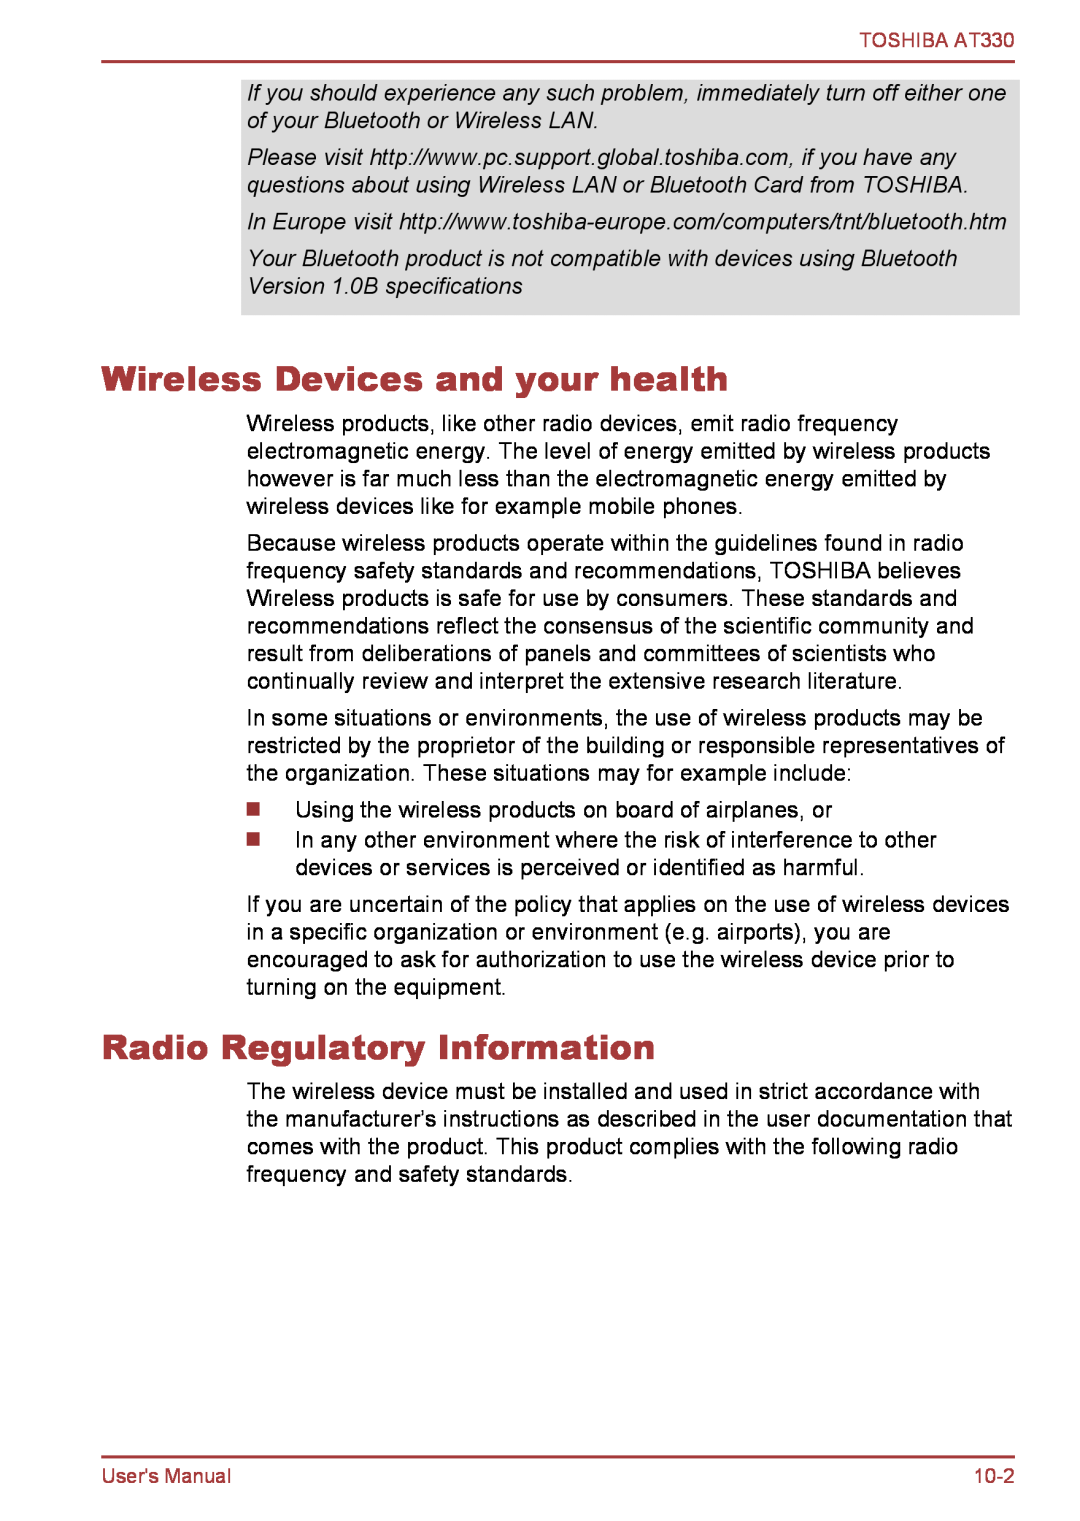 Toshiba at330 user manual Wireless Devices and your health, Radio Regulatory Information 